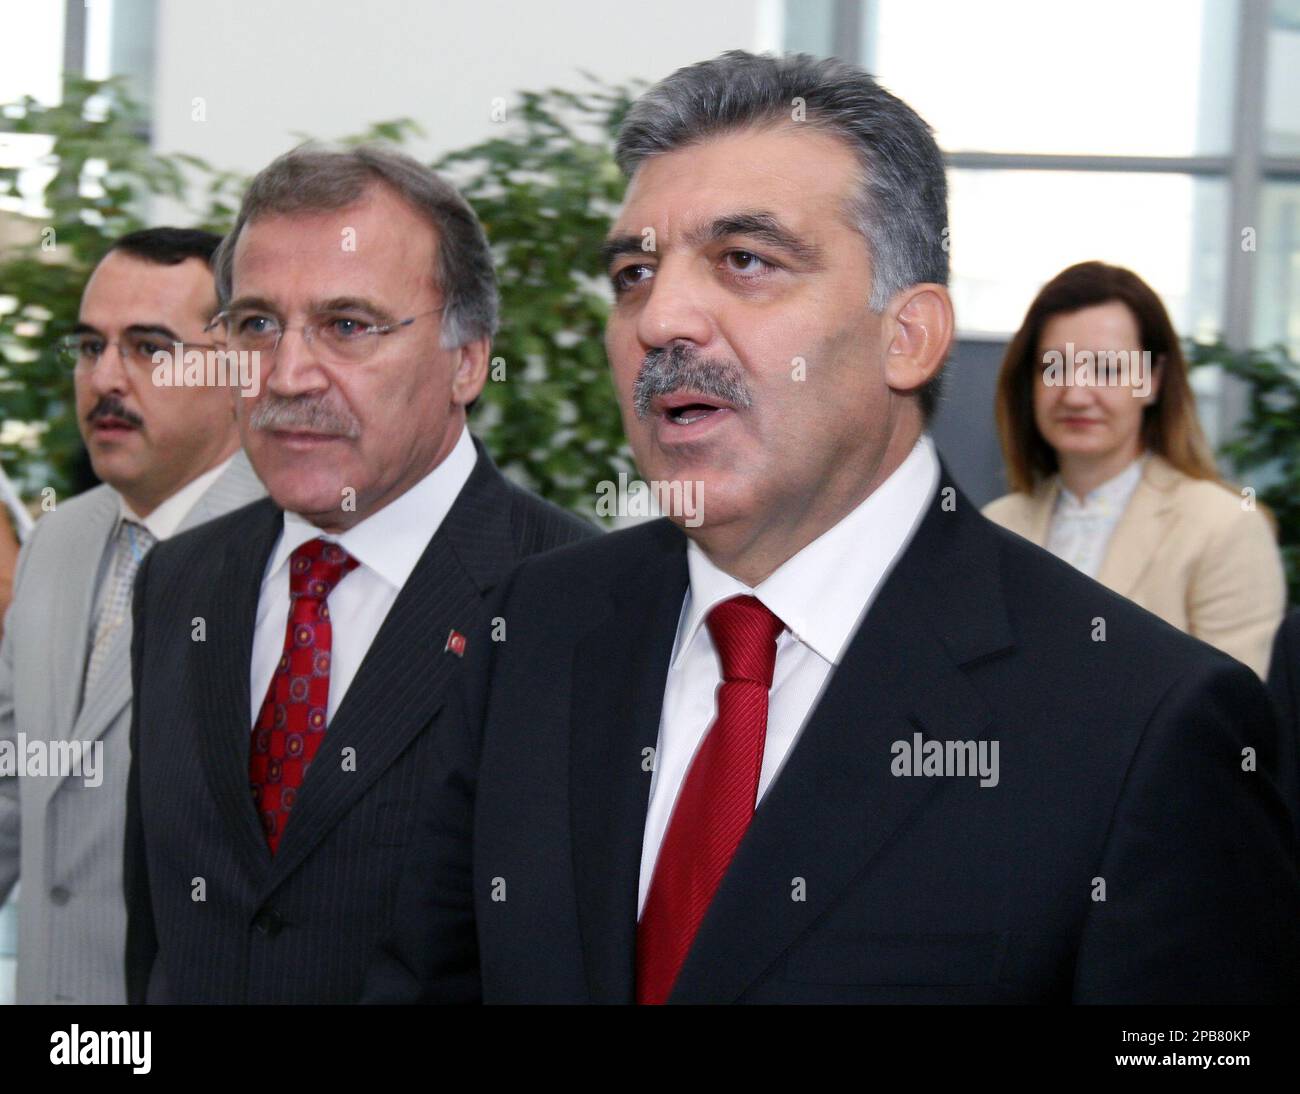 Flanked by his party officials, Sadullah Ergin, left, Mehmet Ali Sahin, second left, and Nukhet Hotar, rear,Turkish Foreign Minister Abdullah Gul, right, arrives at the headquarters of the opposition Nationalist Action Party, MHP, to meet with MHP leader Devlet Bahceli in Ankara, Tuesday, Aug 14, 2007. Gul, once again seeking to become Turkey's president, sought support from opposition leaders Tuesday, altought some parties fear he will undermine secular traditions and provoke the ire of the powerful military. The MHP pledged to attend the voting process in the legislature, enabling the ruling Stock Photo